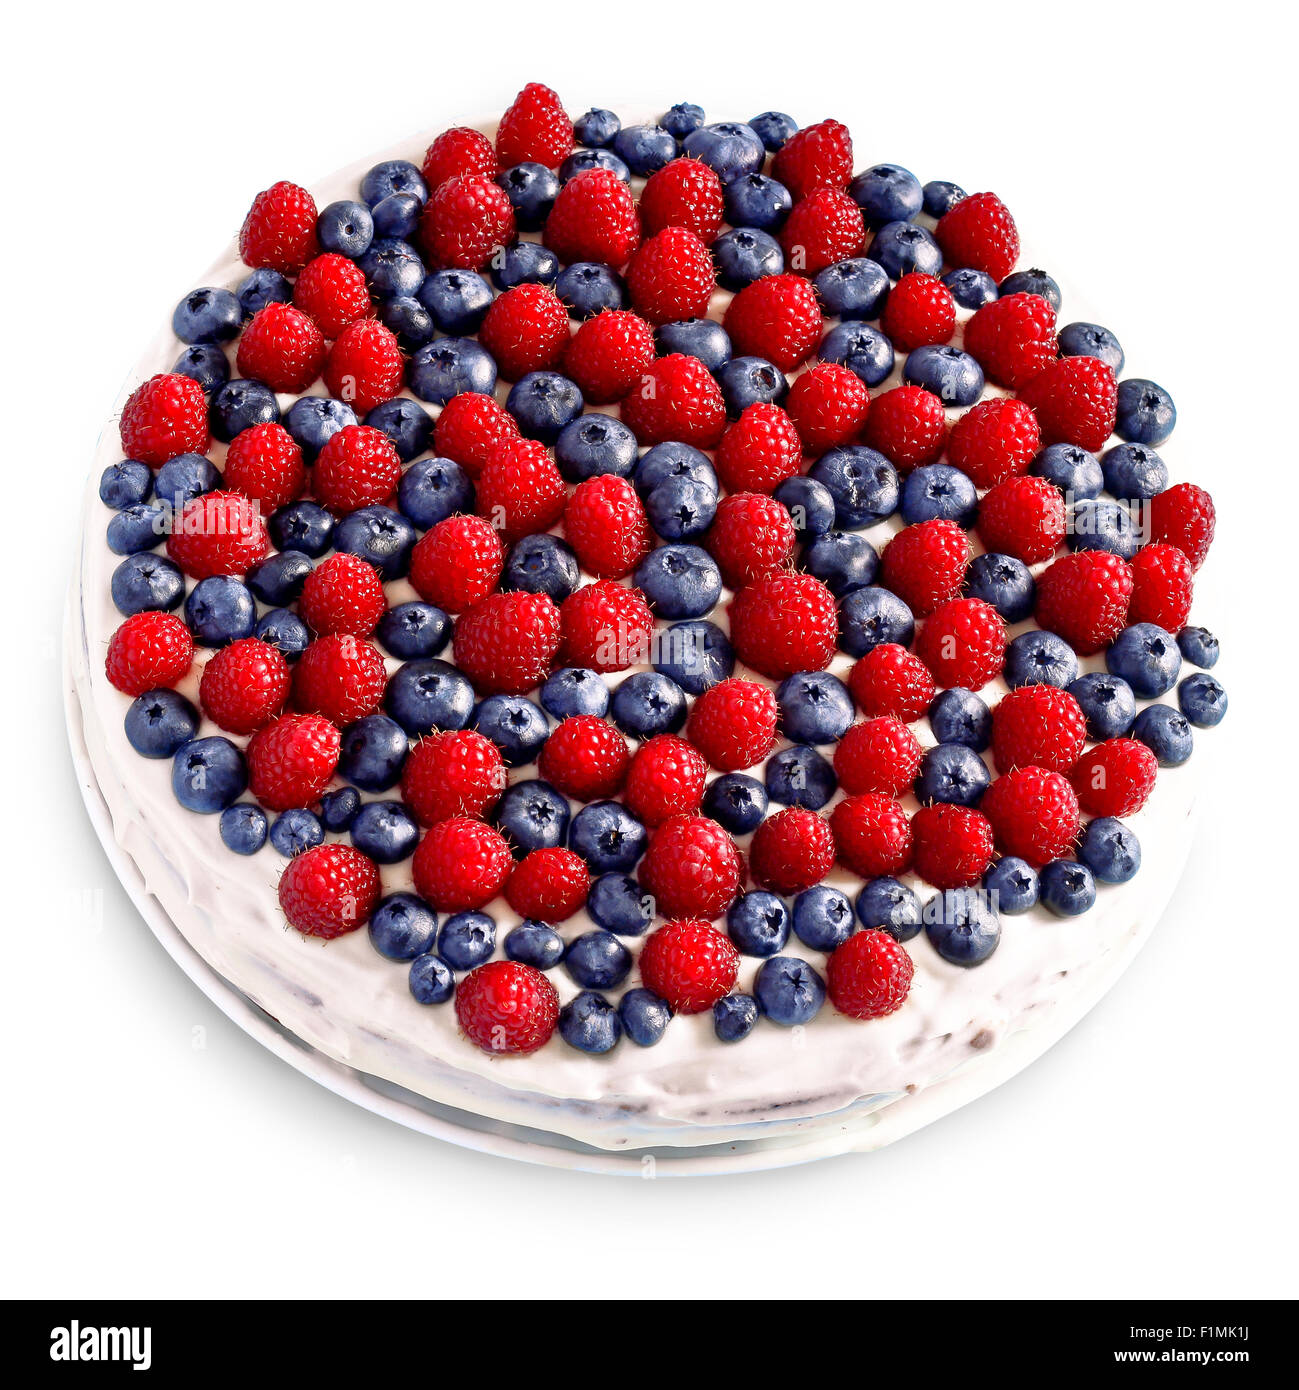 Creamy sweet cake with chocolate and cream, garnished with blueberries and raspberries on a white tablecloth Stock Photo